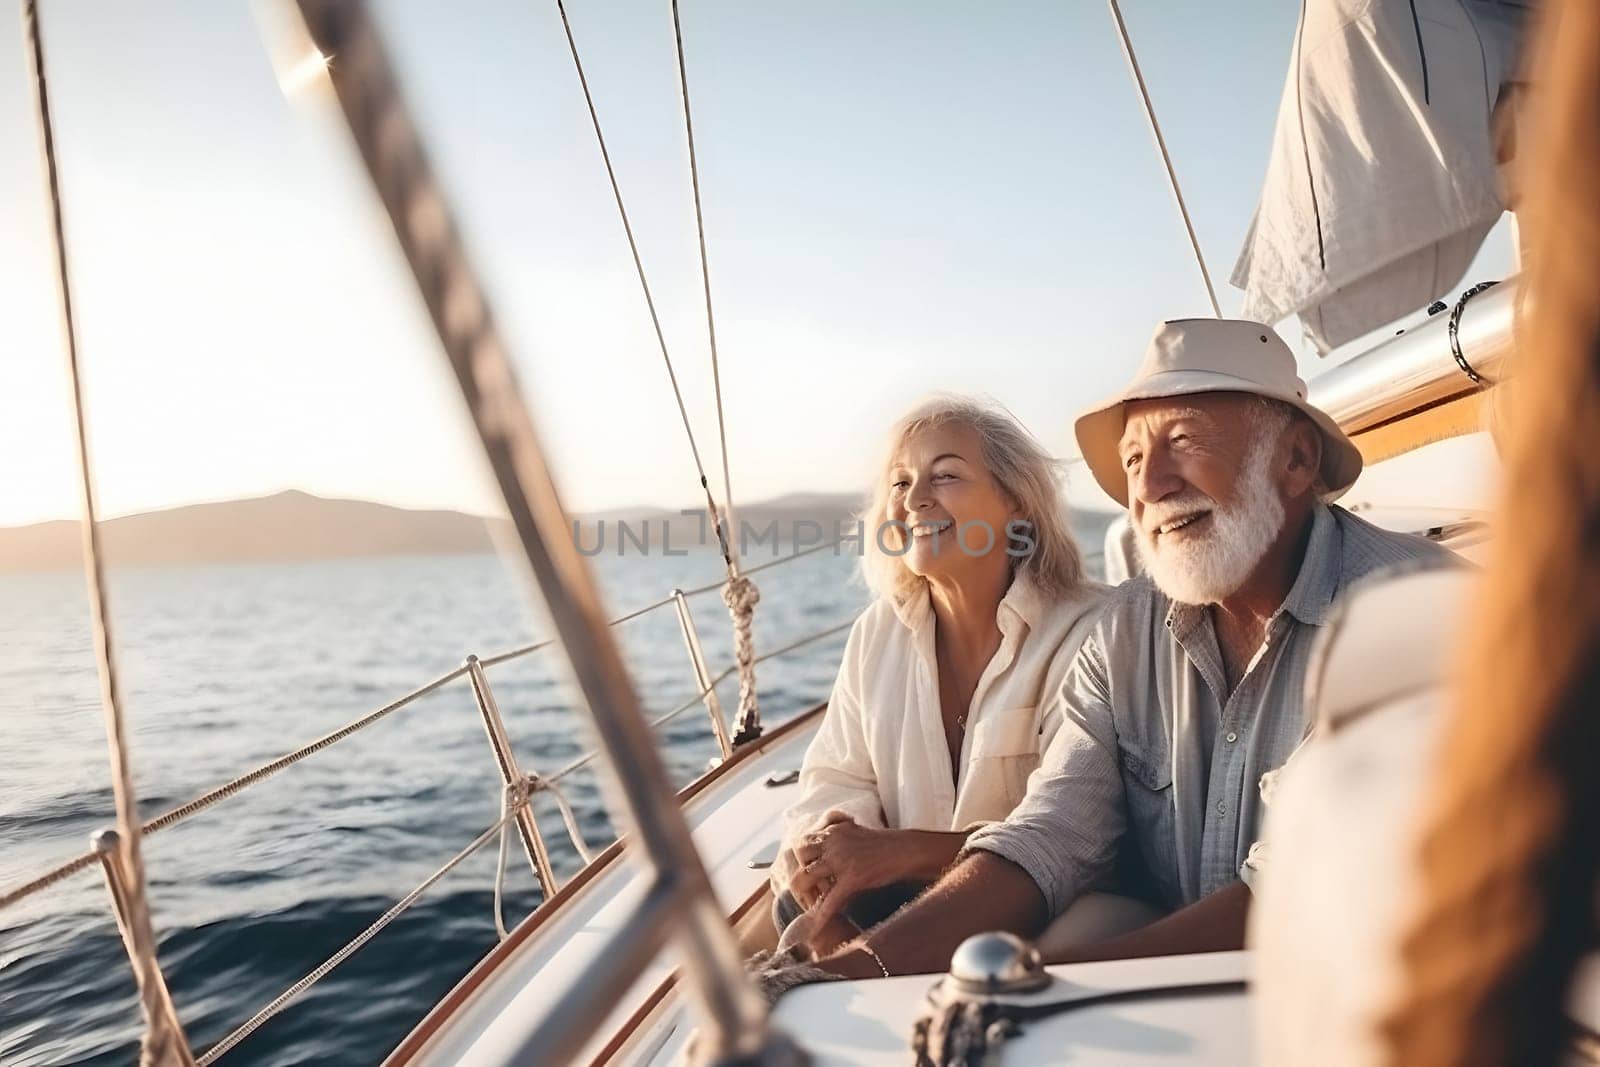 Beautiful and happy senior caucasian couple on a sailboat at sunset or sunrise. Neural network generated in May 2023. Not based on any actual person, scene or pattern.